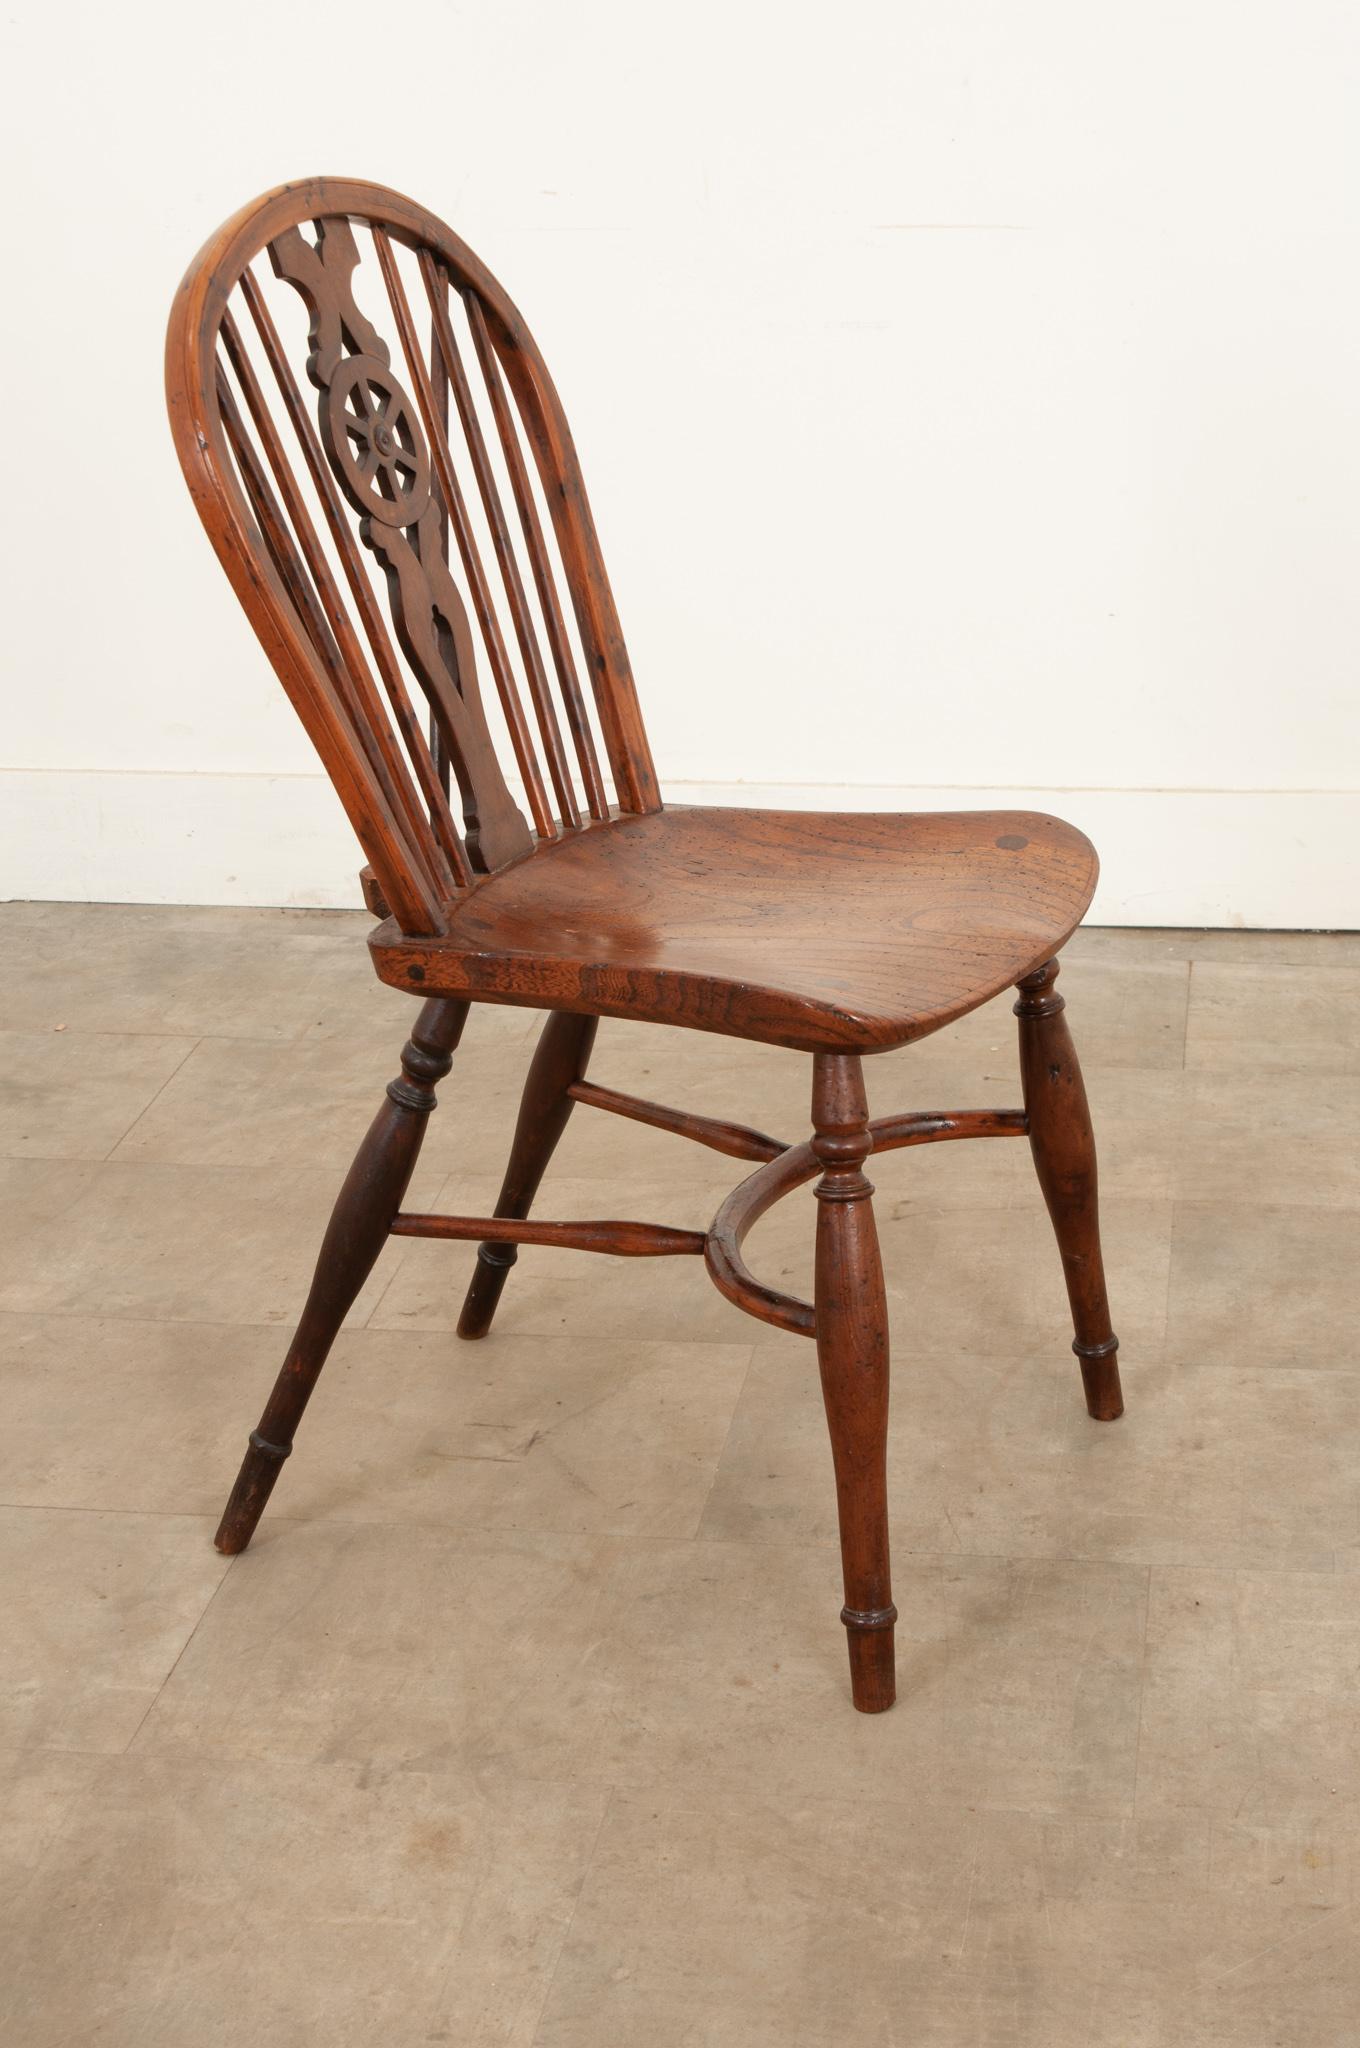 Hand-Carved Early 19th Century Wheelback Windsor Chair For Sale